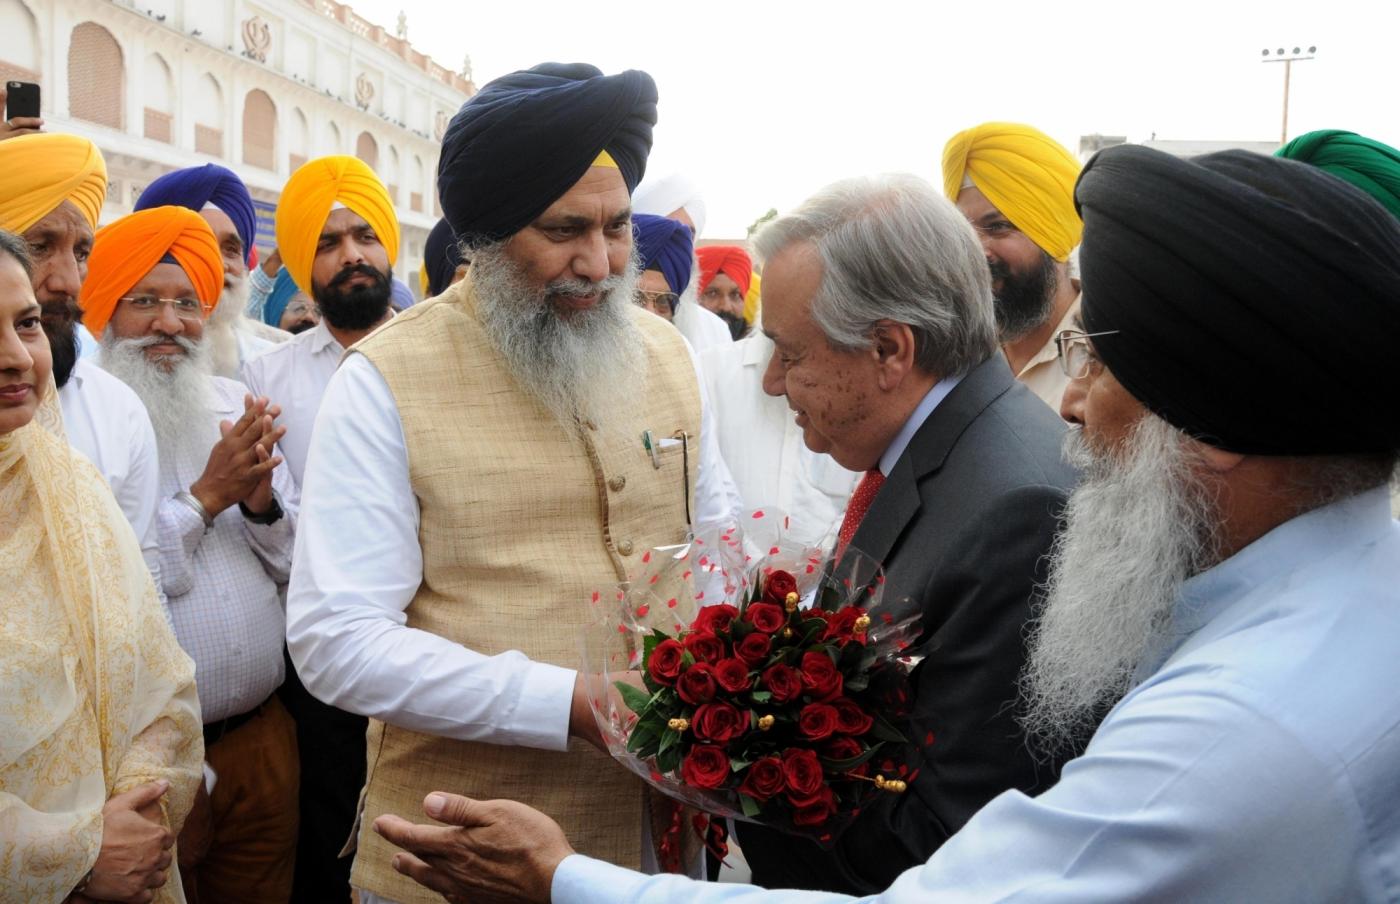 Amritsar: United Nations Secretary-General Antonio Guterres pays obeisance at the Golden Temple in Amritsar on Oct 3, 2018. (Photo: IANS) by .